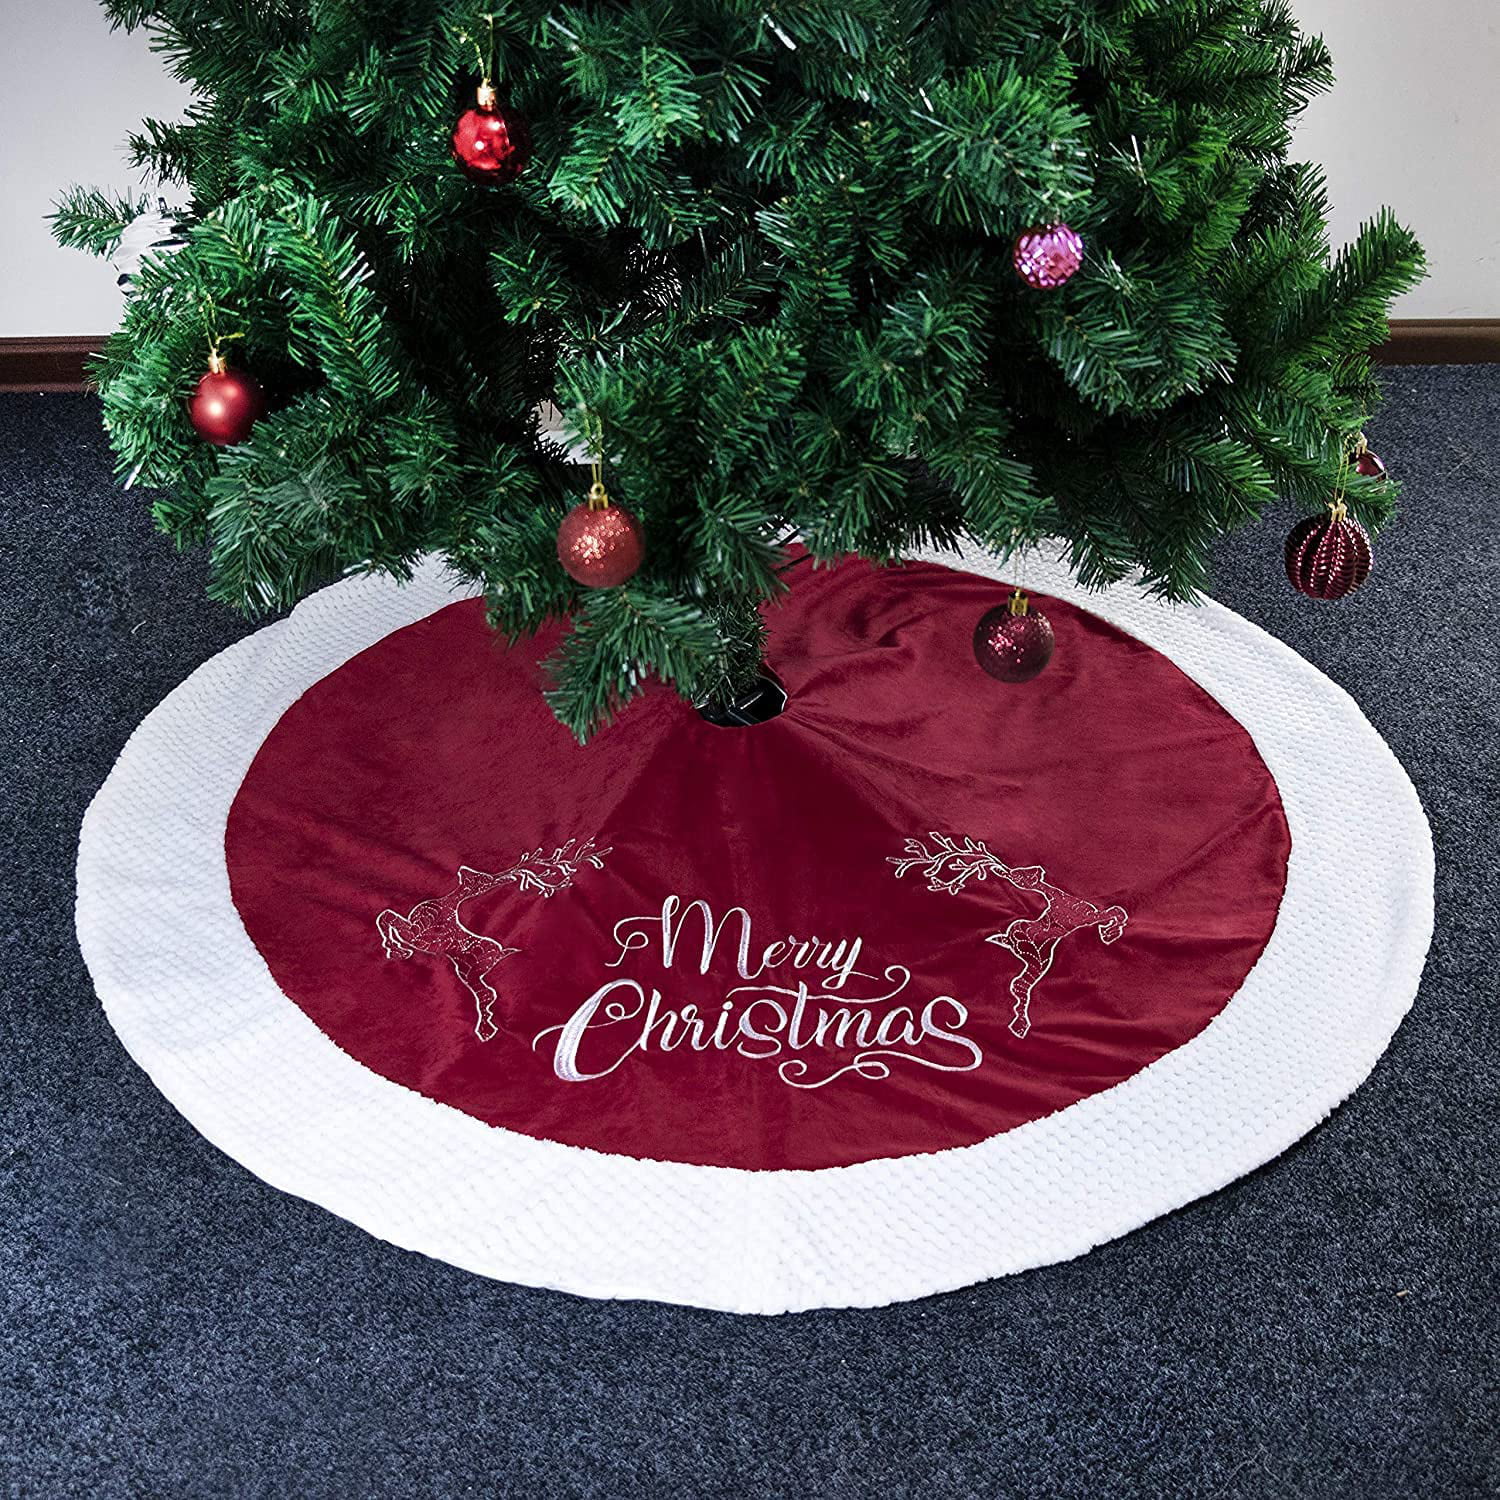 Beyond Your Thoughts 2021 New Large Christmas Tree Skirt 48 Inches Gray Burlap with Red Reindeer Snowflake White Faux Fur Christmas Party Decorations Gift for Family